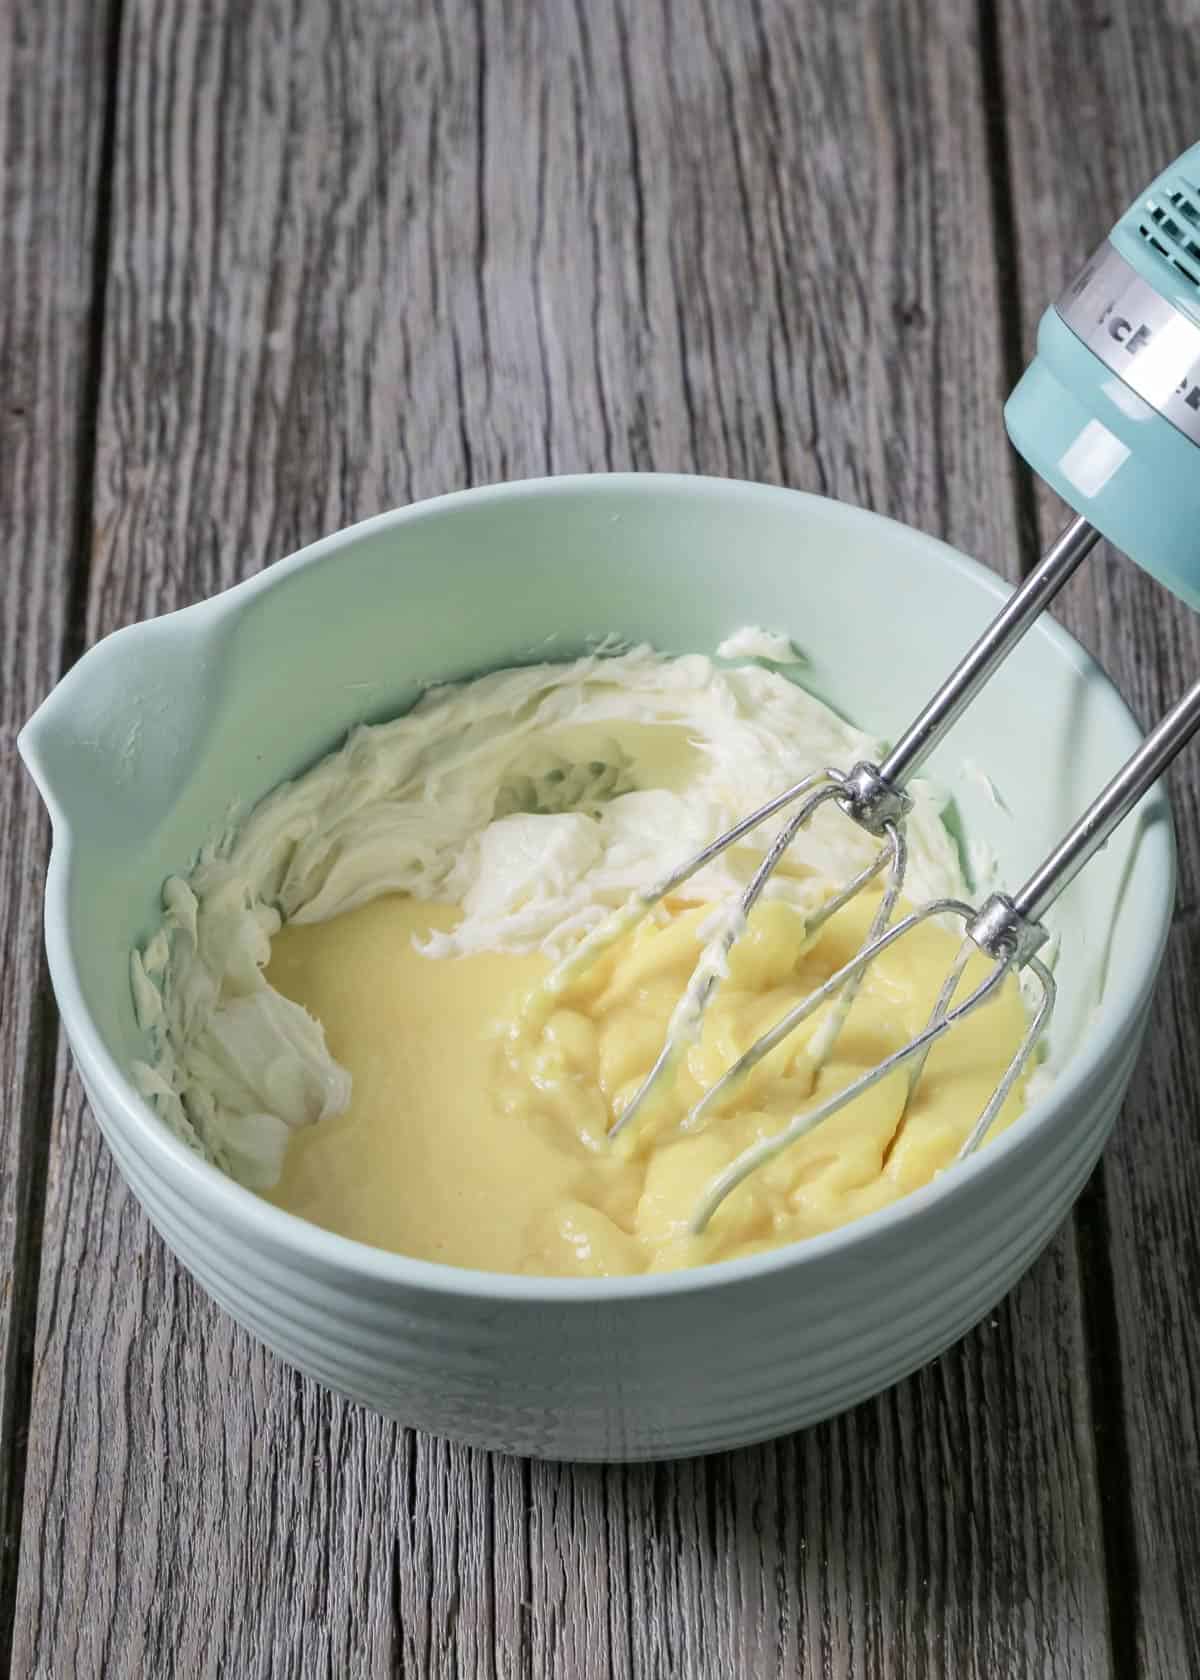 Mixing pudding with the butter in a bowl with a mixer.